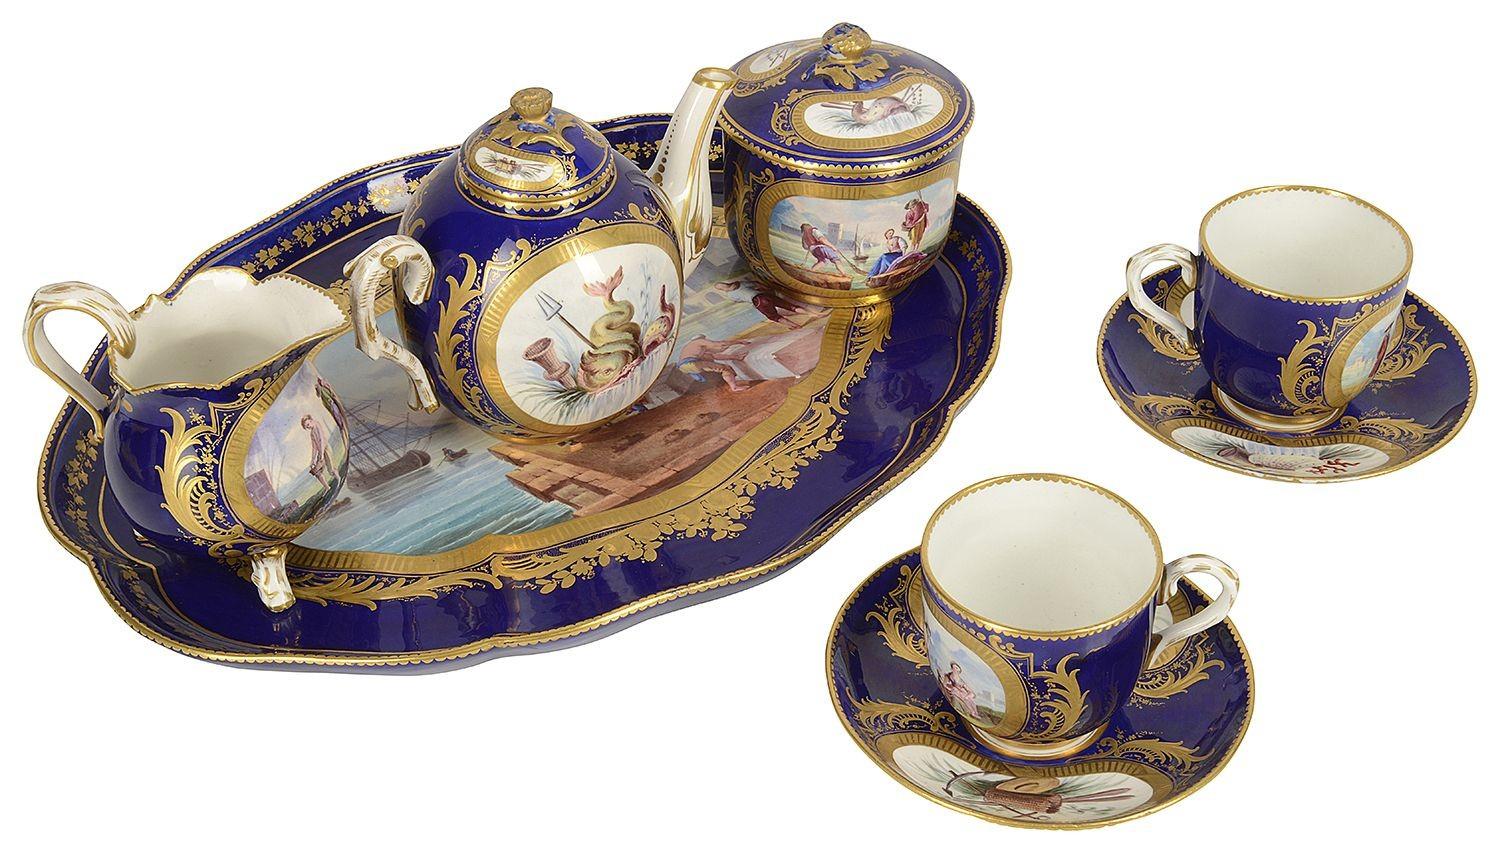 A very good quality late 19th Century French 'Sevres' style porcelain cabaret set. Consisting on a tea pot, sugar bowl, milk jug and two cups and saucers. Each with the classical Cobalt blue ground with inset hand painted scenes of a harbour and